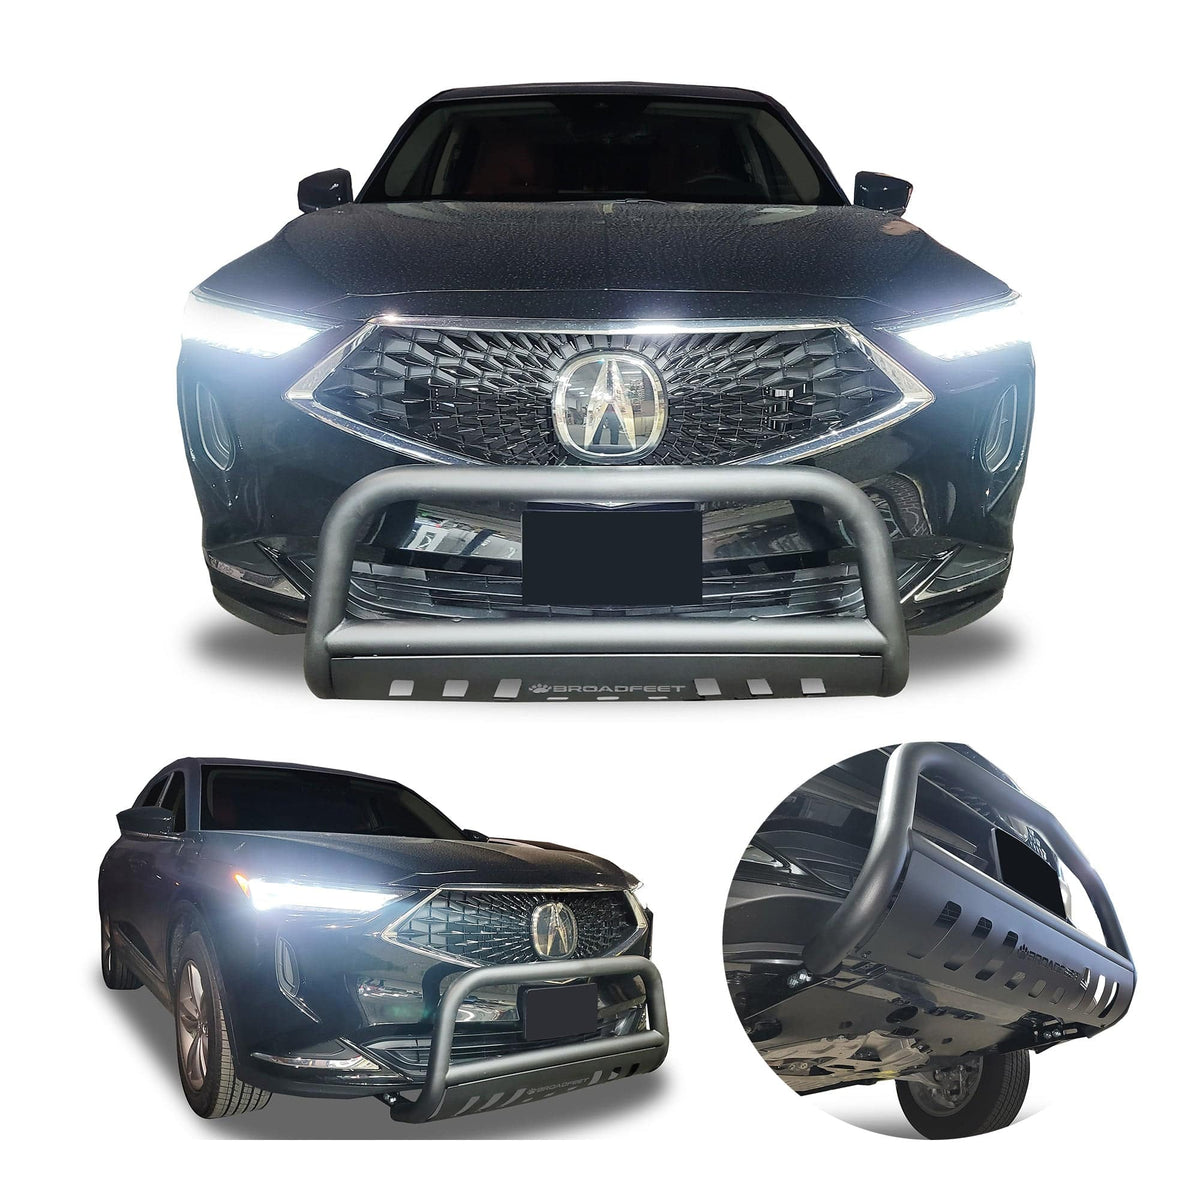 Front Bull Bar with Skid Plate (DW6) Bumper Guard fits Acura MDX 2022-2024 - Broadfeet